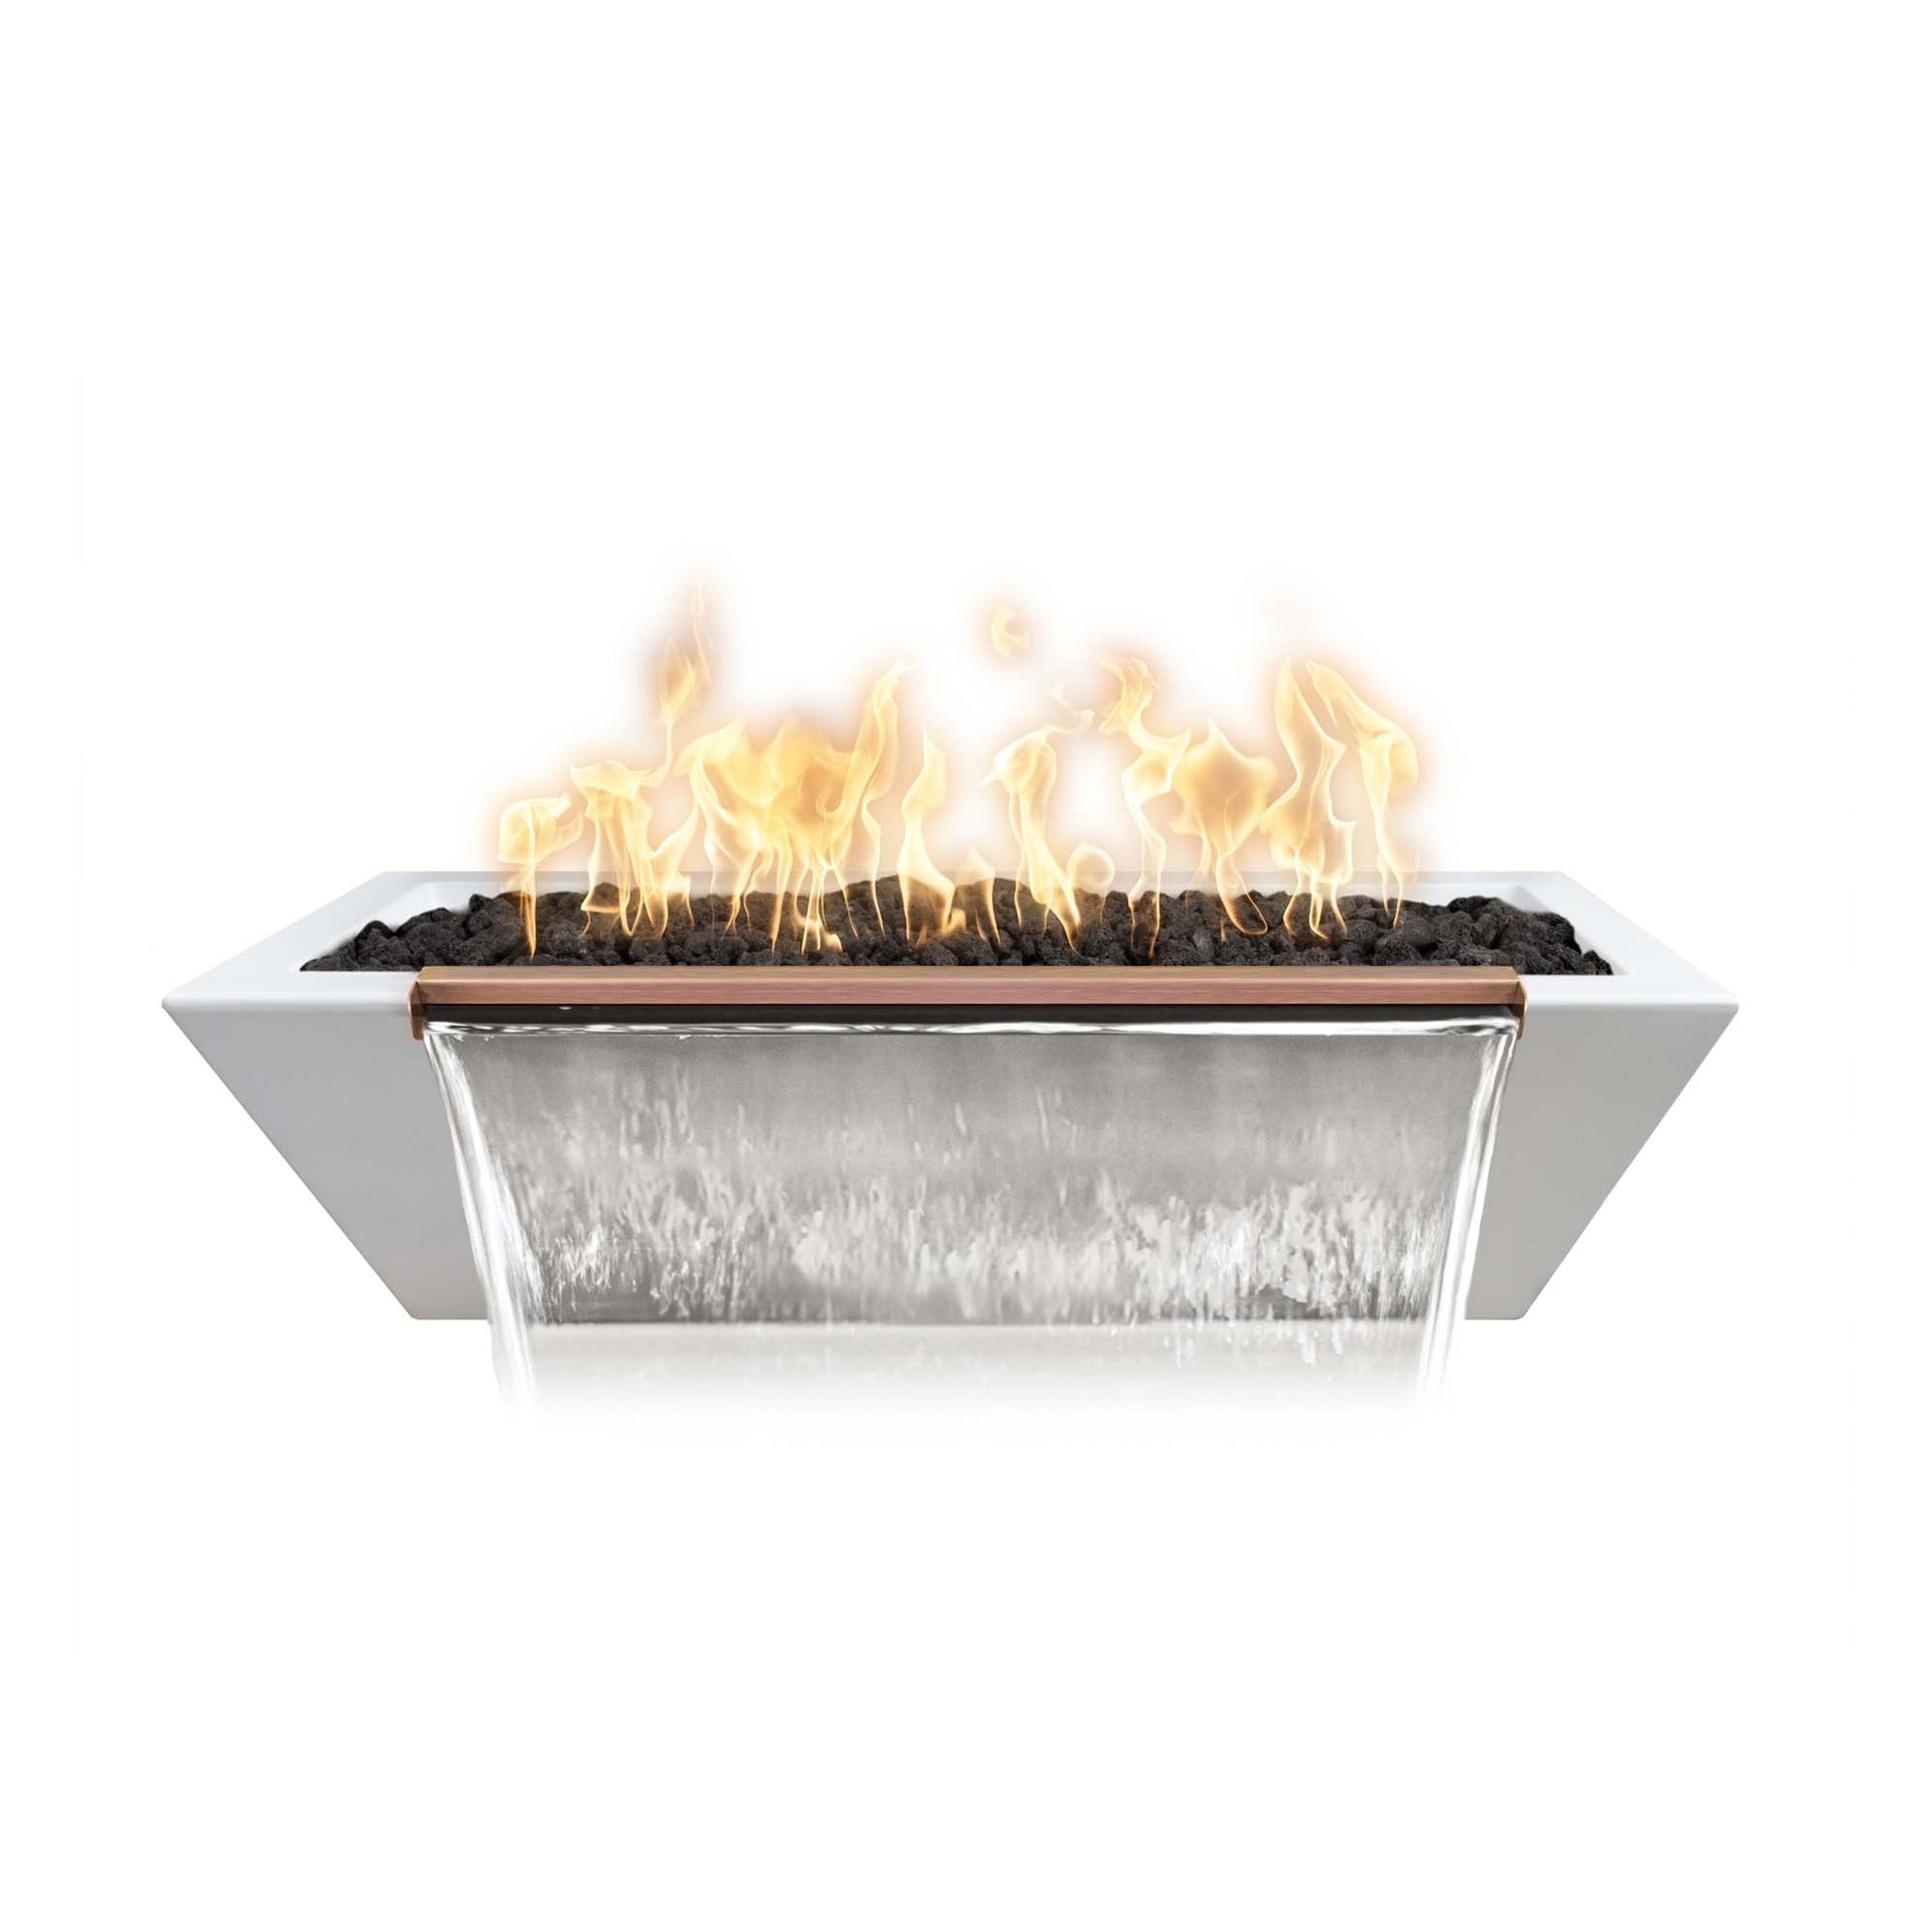 The Outdoor Plus Linear Maya 60" Vanilla GFRC Concrete Liquid Propane Fire & Water Bowl with Match Lit with Flame Sense Ignition